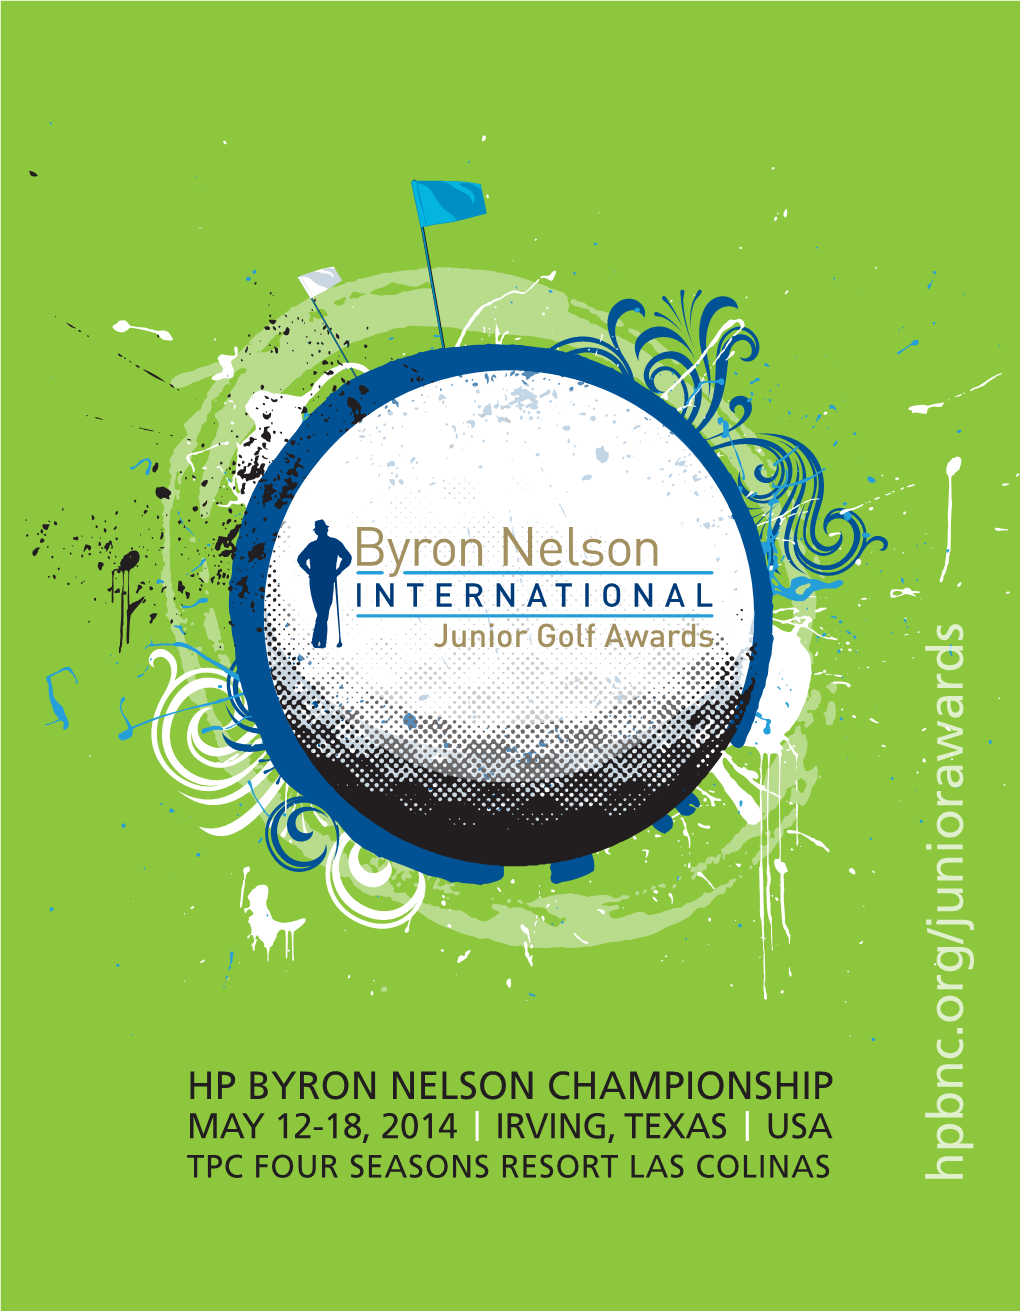 Hpbnc.Org/Juniorawards for More Than 45 Years, the HP Byron Nelson Championship Has Been a Showcase for Premier Professional Golf in Dallas, Texas